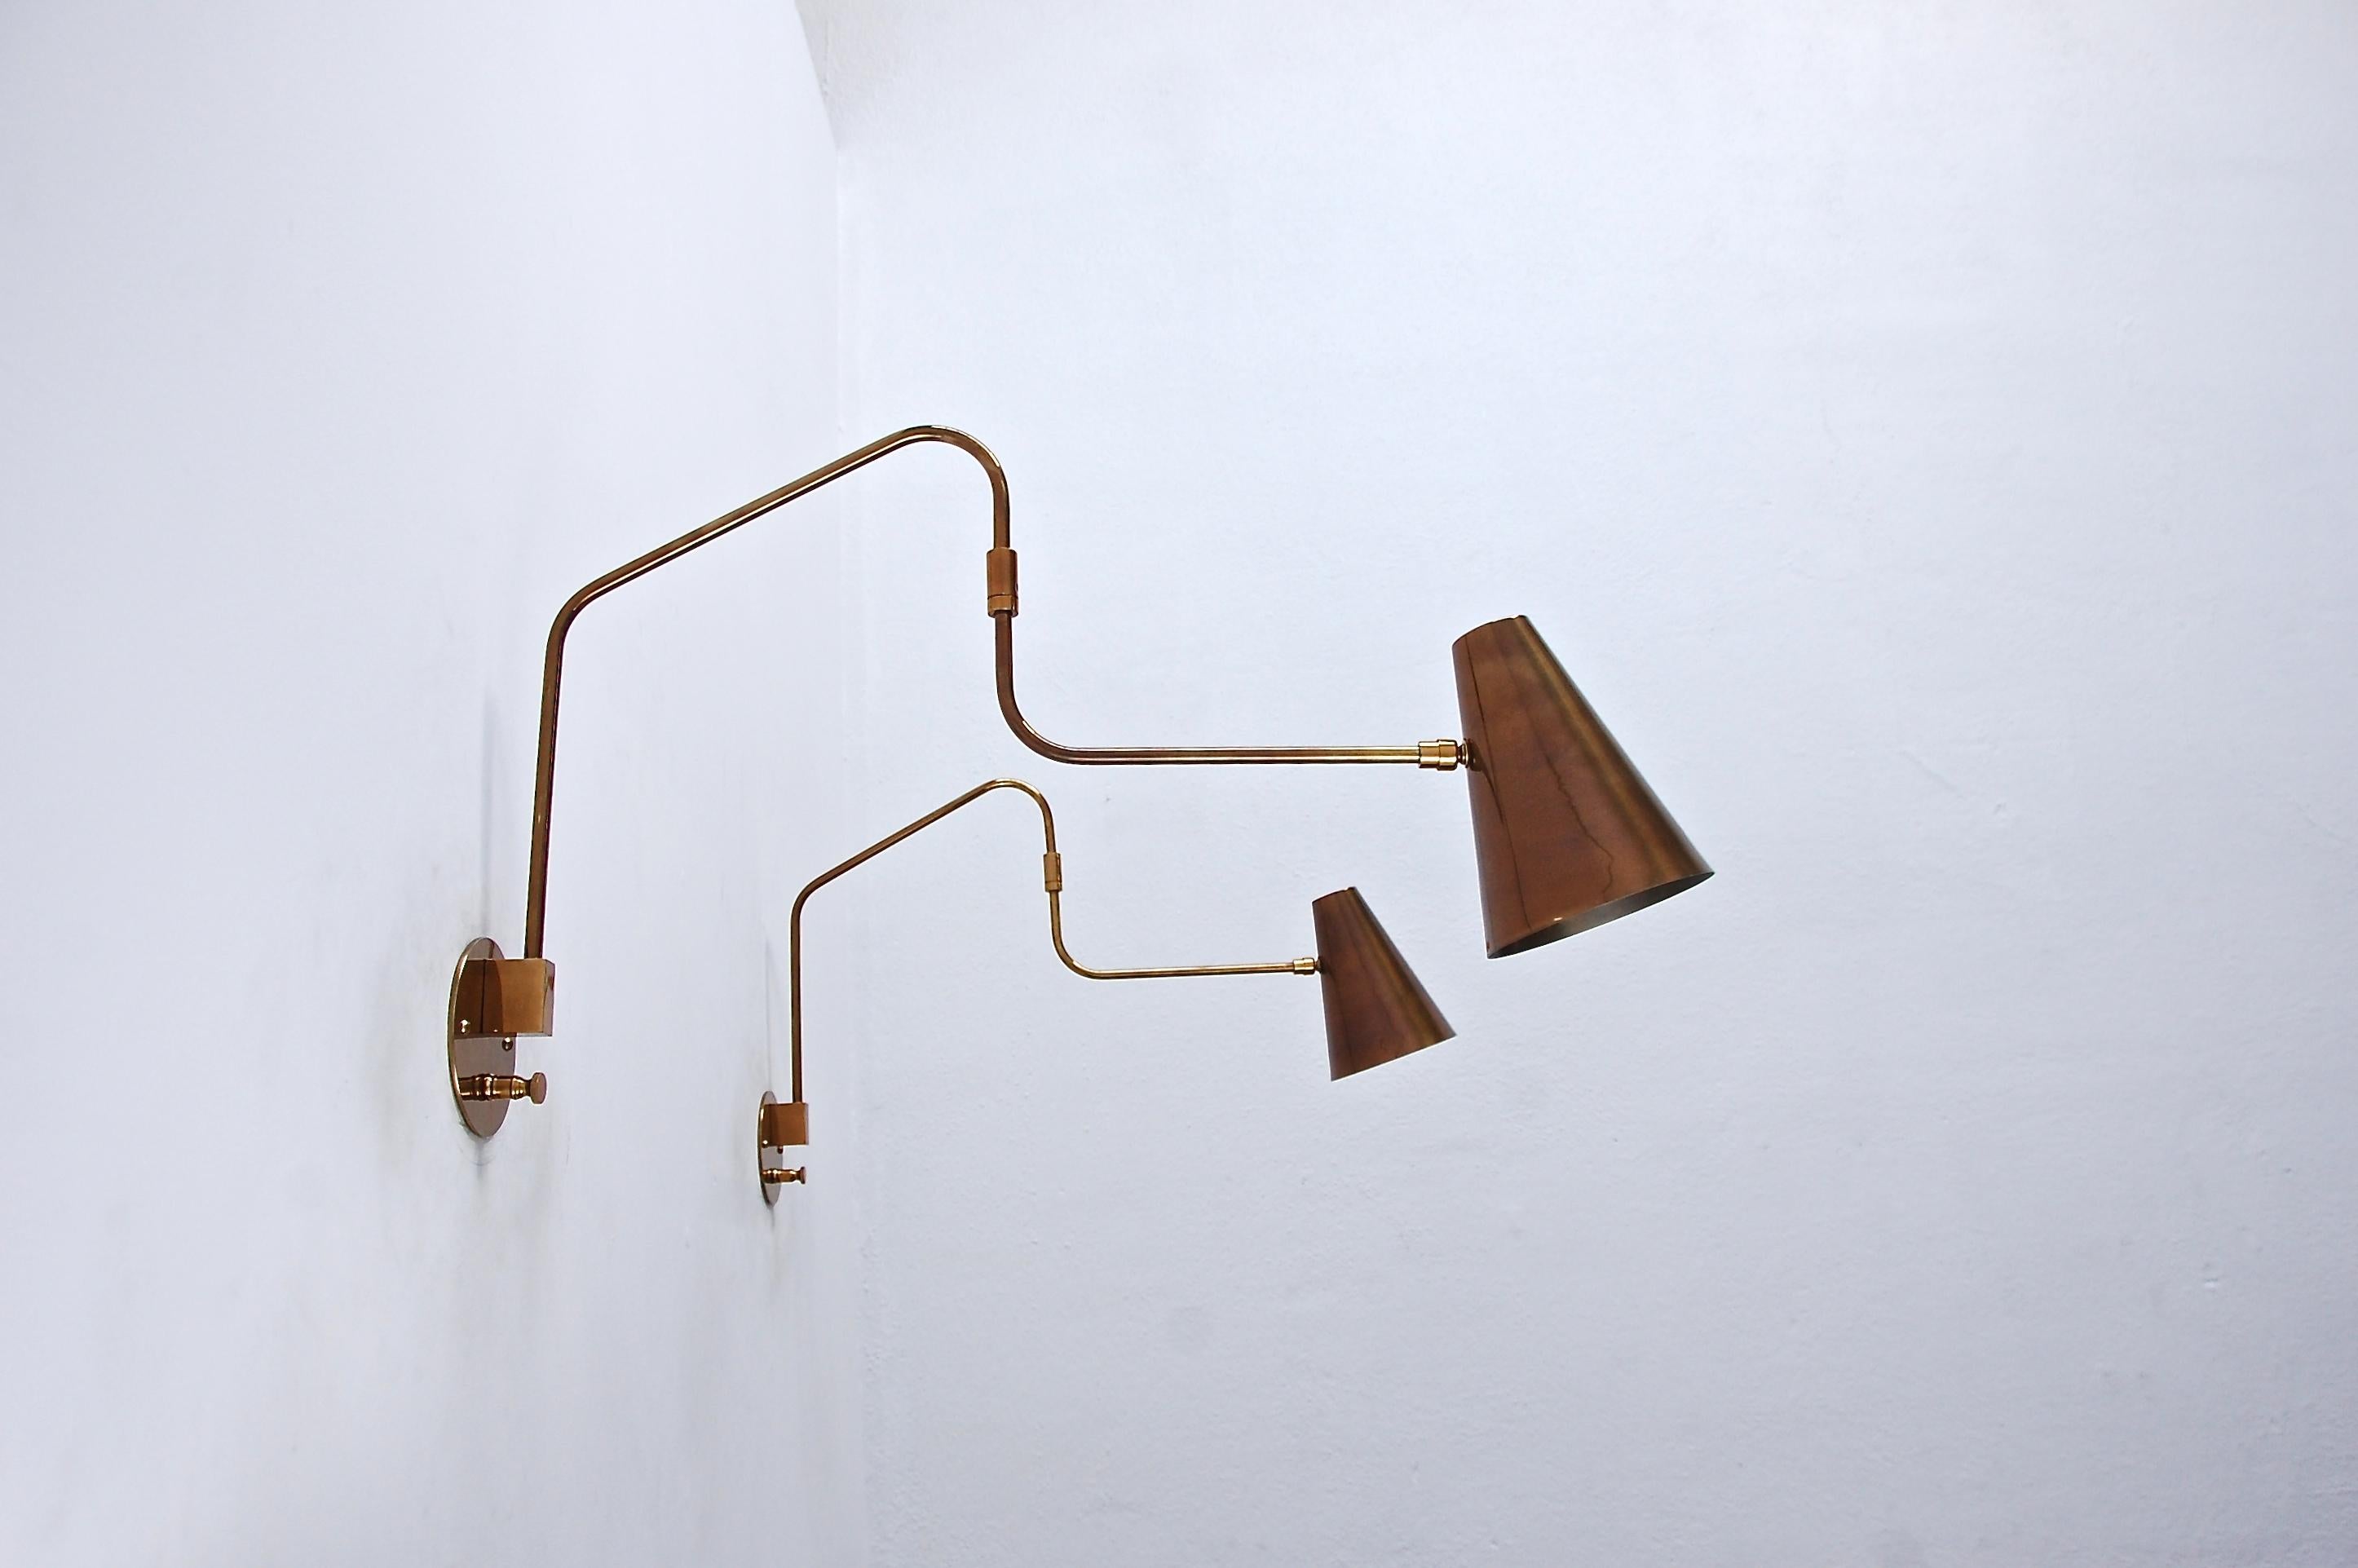 Beautiful brass LU swing sconce made by Lumfardo Luminaires in patinated brass. Wired with an E26 medium based socket. Light bulb provided as well as all mounting hardware. Priced individually.

Measurements: 
Height 15”
Depth/length: 25.25”,